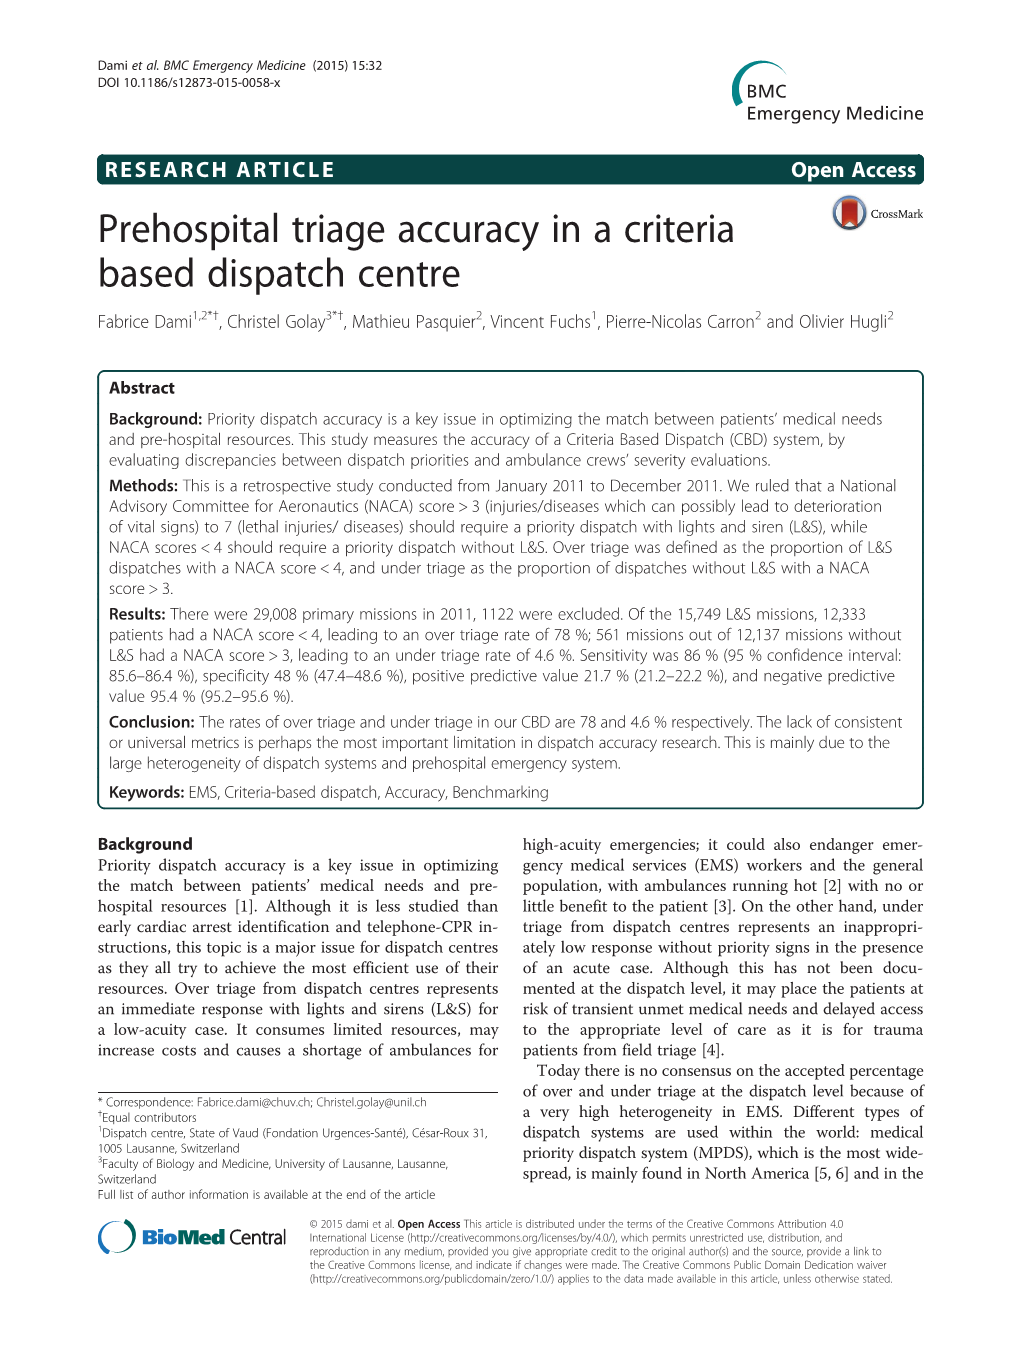 Prehospital Triage Accuracy in a Criteria Based Dispatch Centre